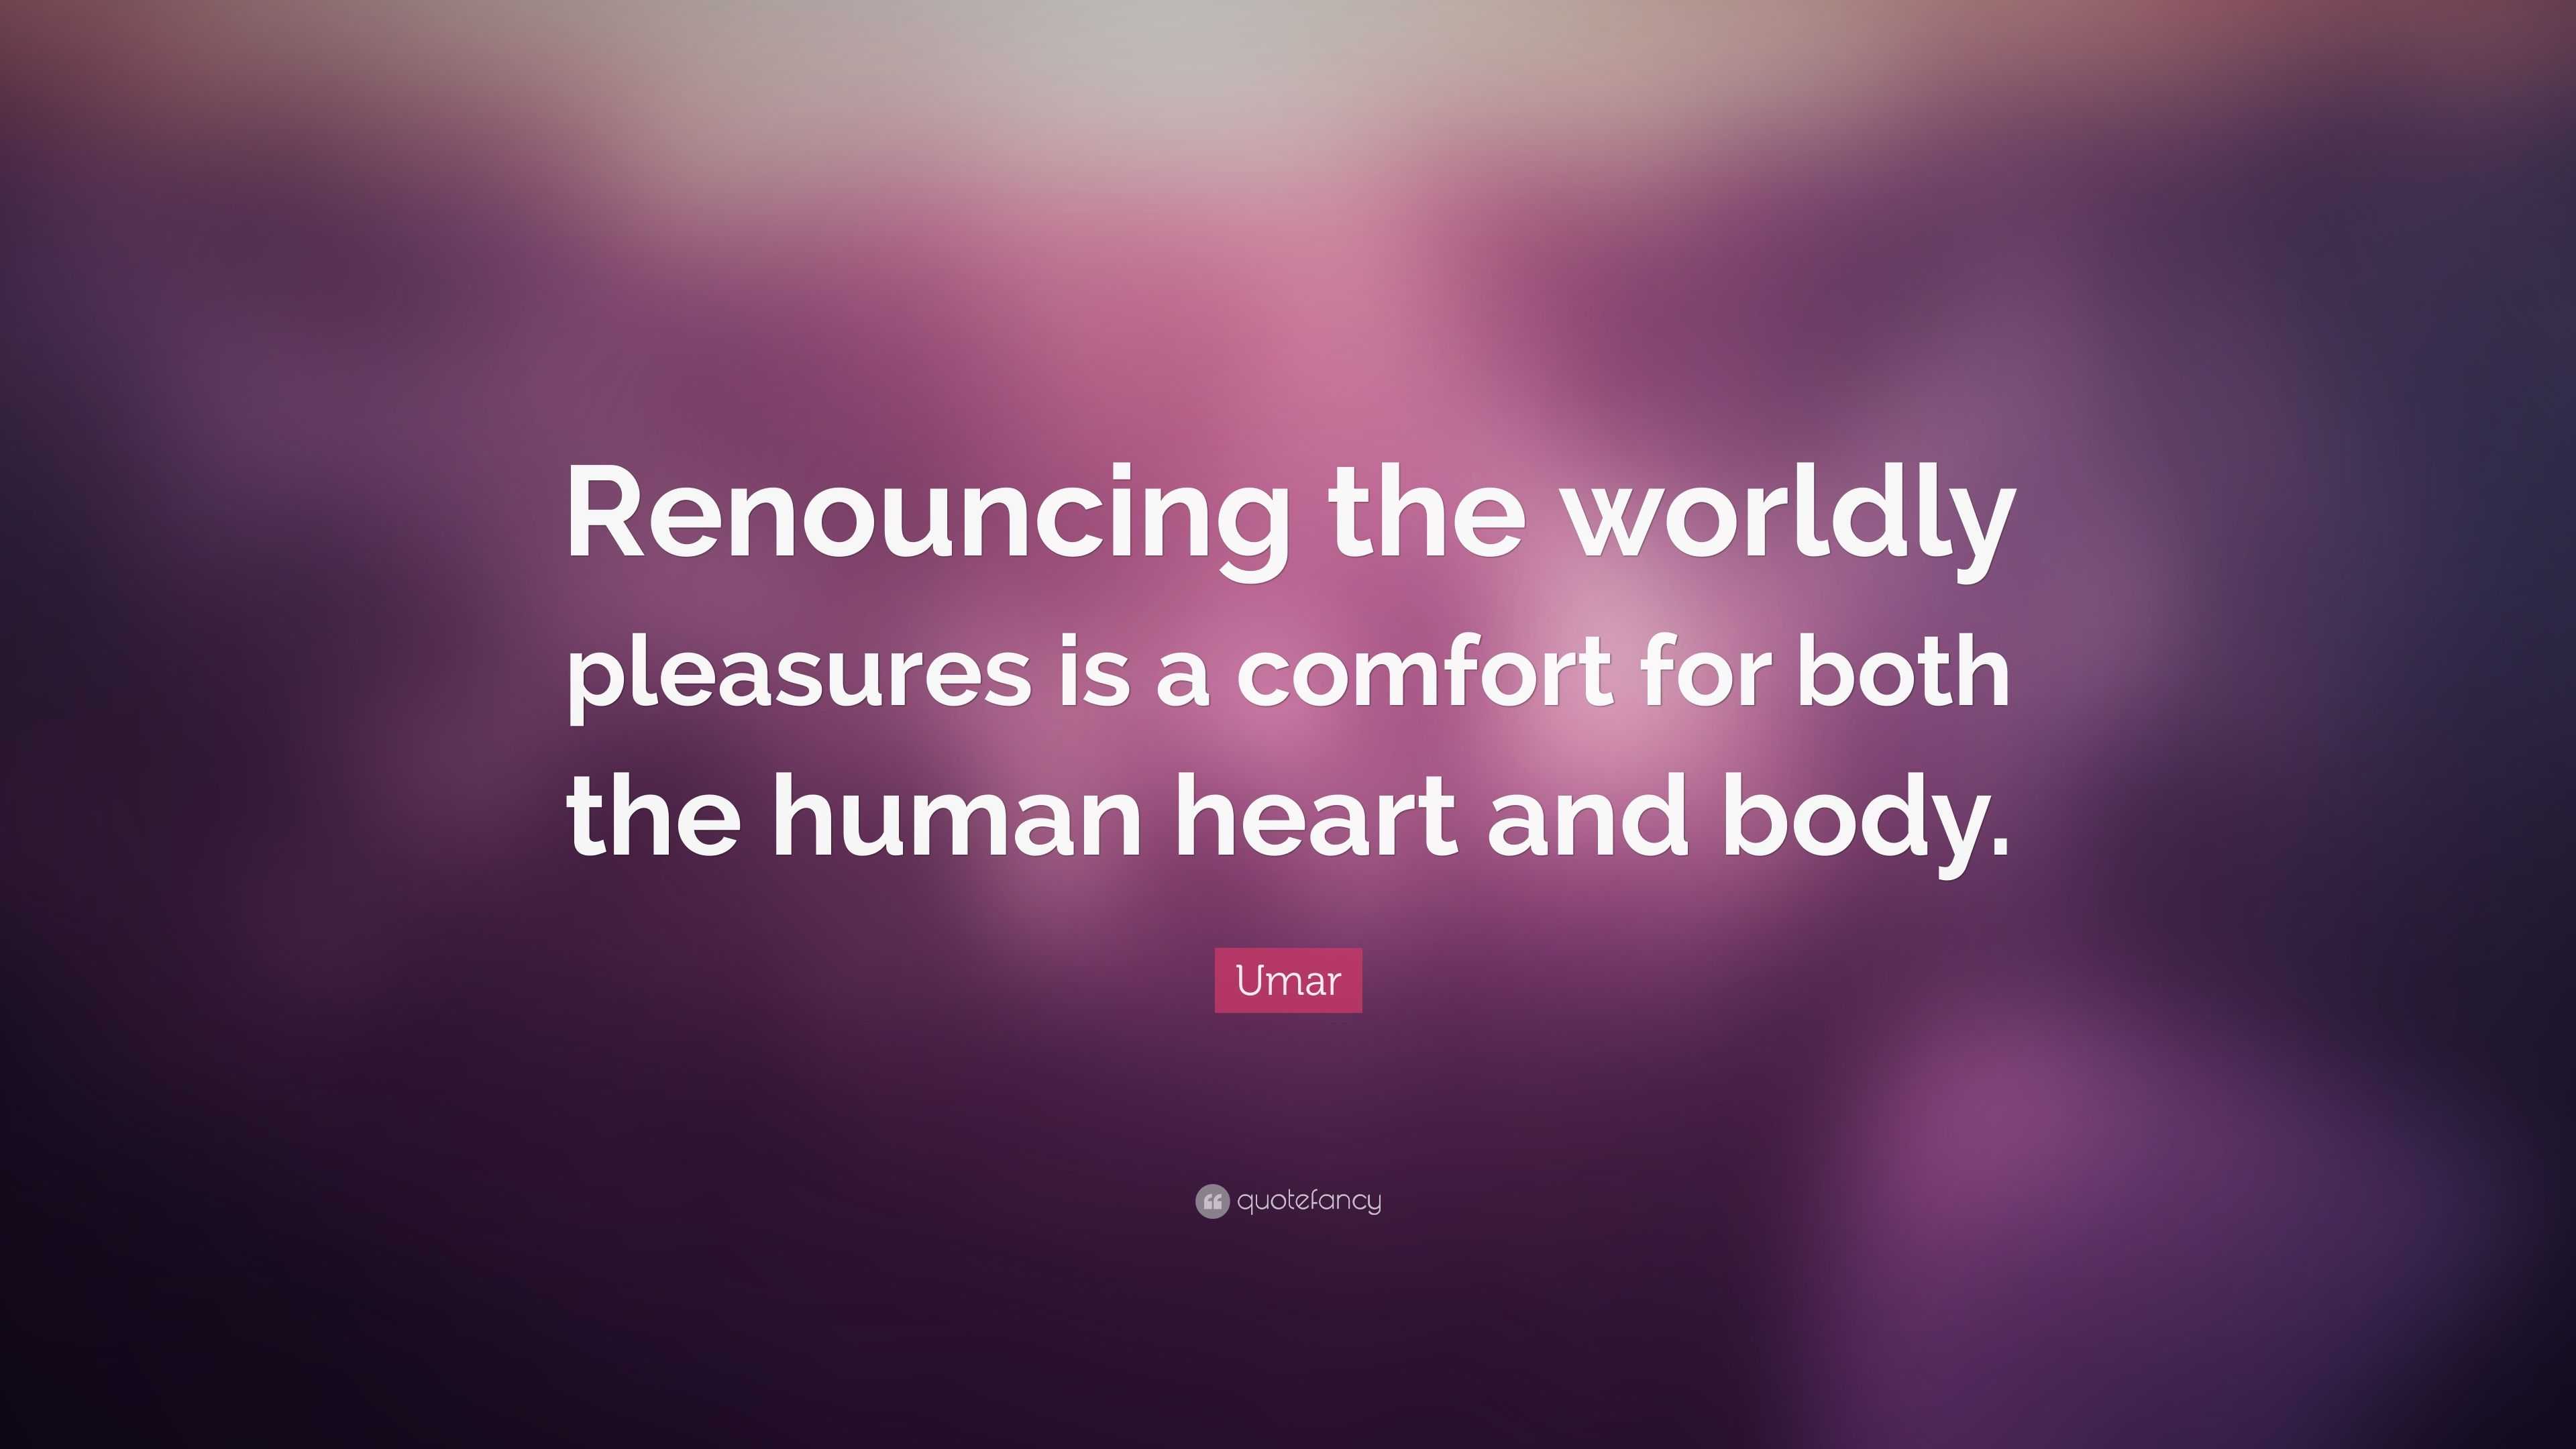 Umar Quote: “Renouncing the worldly pleasures is a comfort for